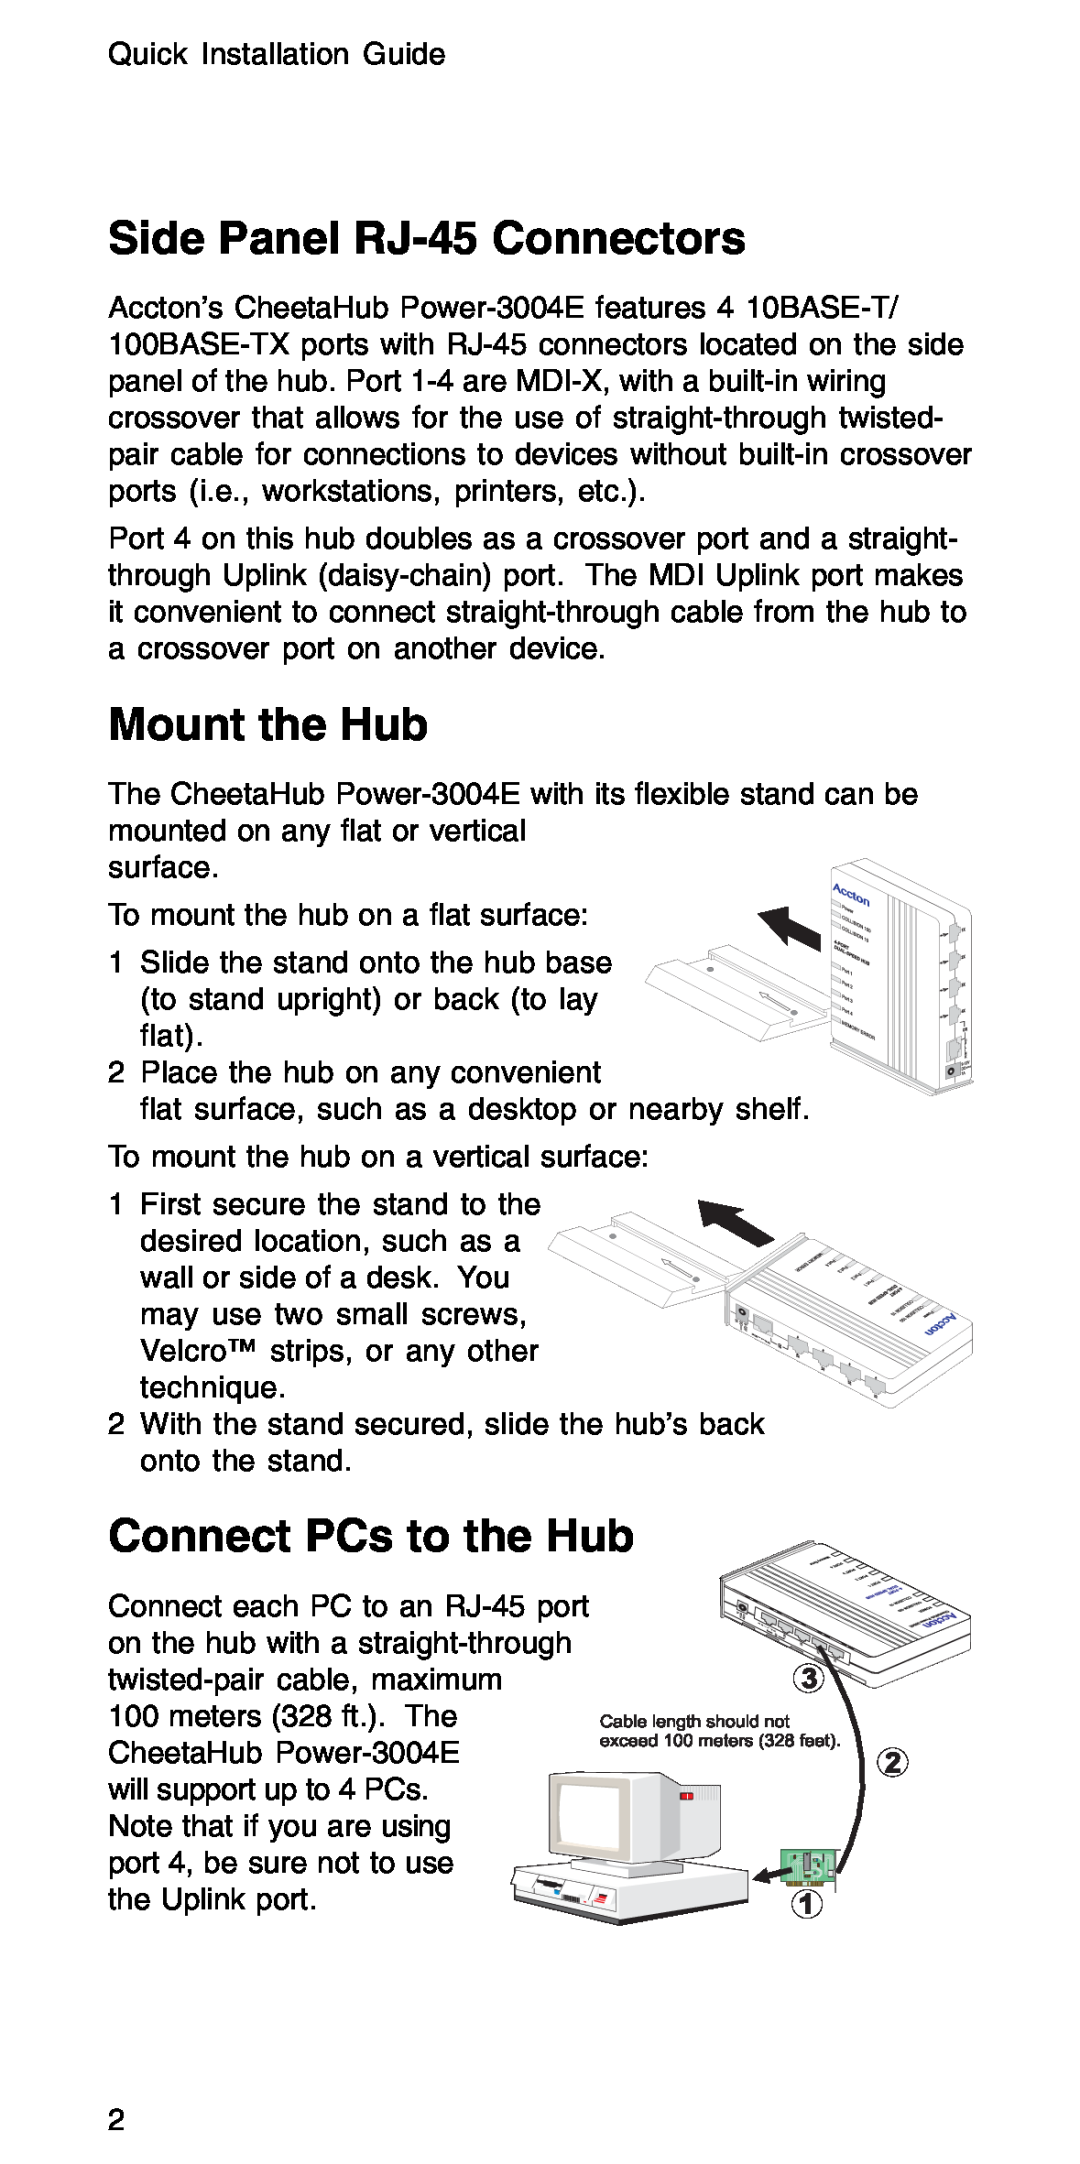 Accton Technology POWER-3004E manual Side Panel RJ-45Connectors, Mount the Hub, Connect PCs to the Hub 